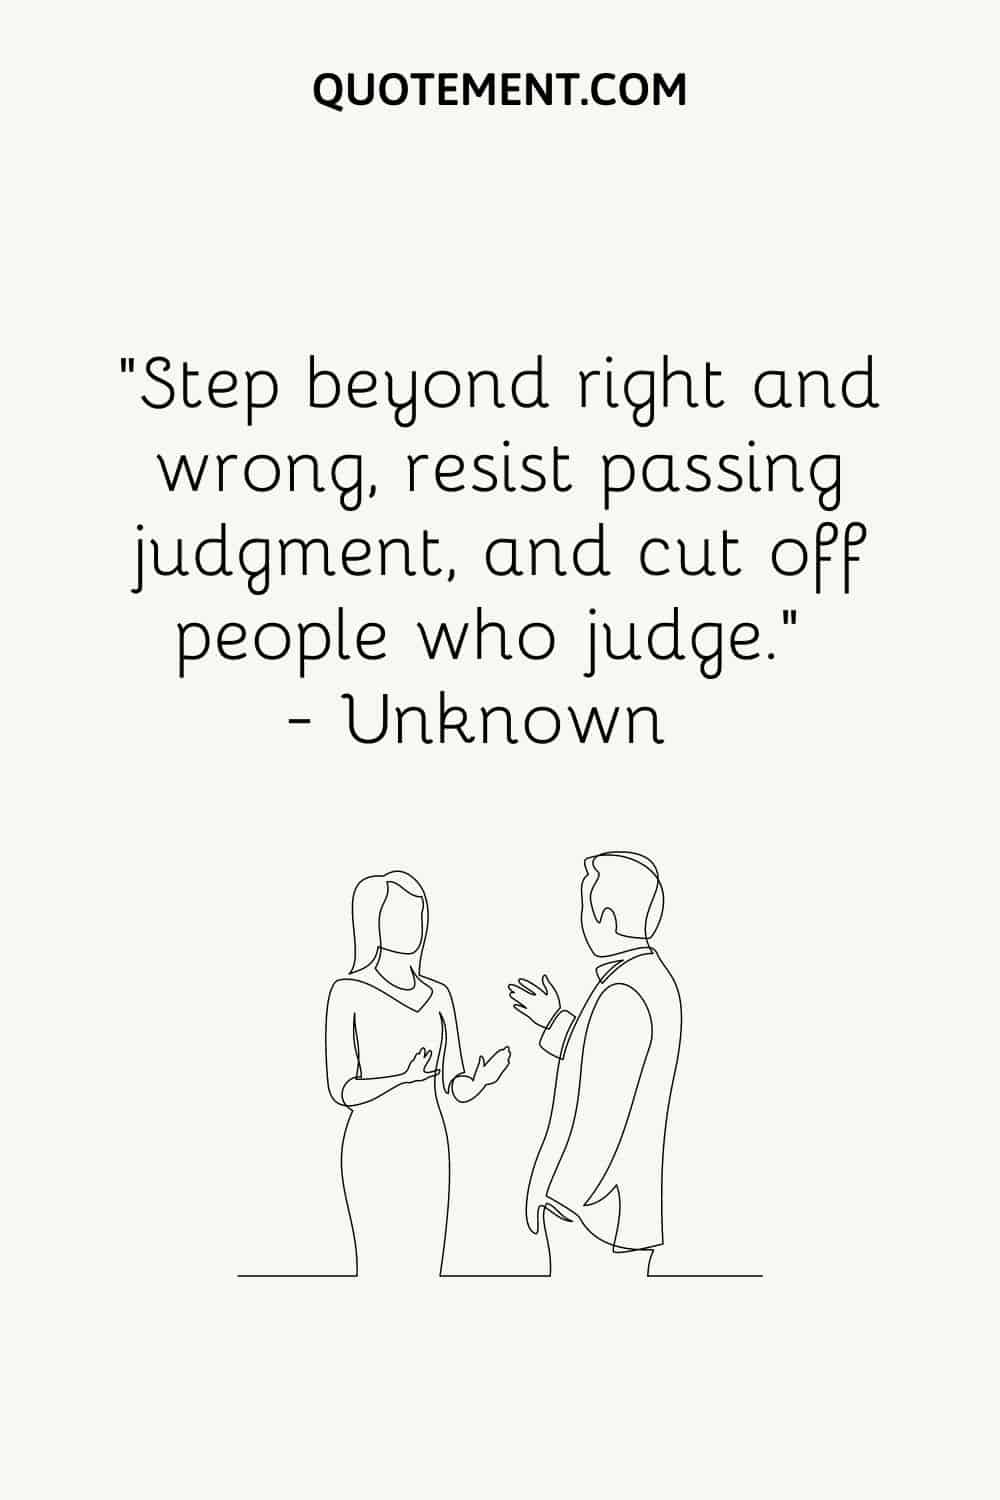 “Step beyond right and wrong, resist passing judgment, and cut off people who judge.” — Unknown